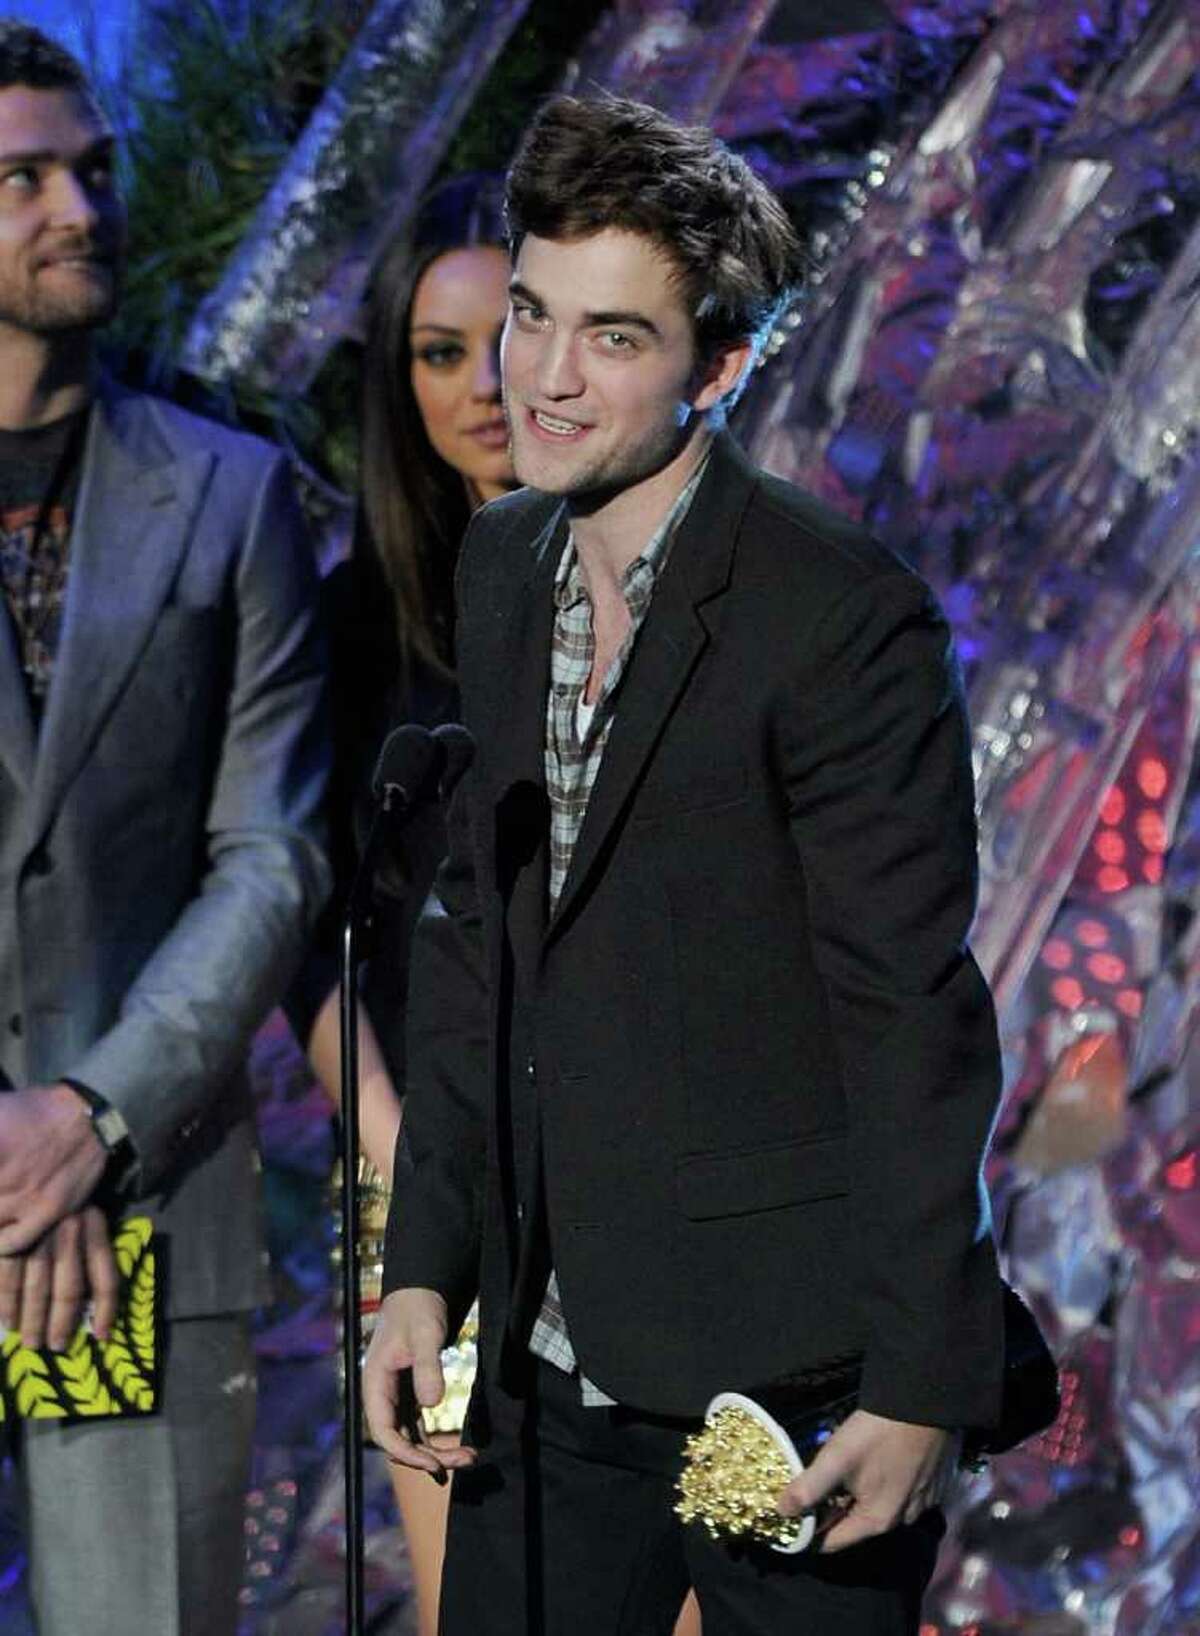 Actor Robert Pattinson accepts the Best Male Performance onstage.